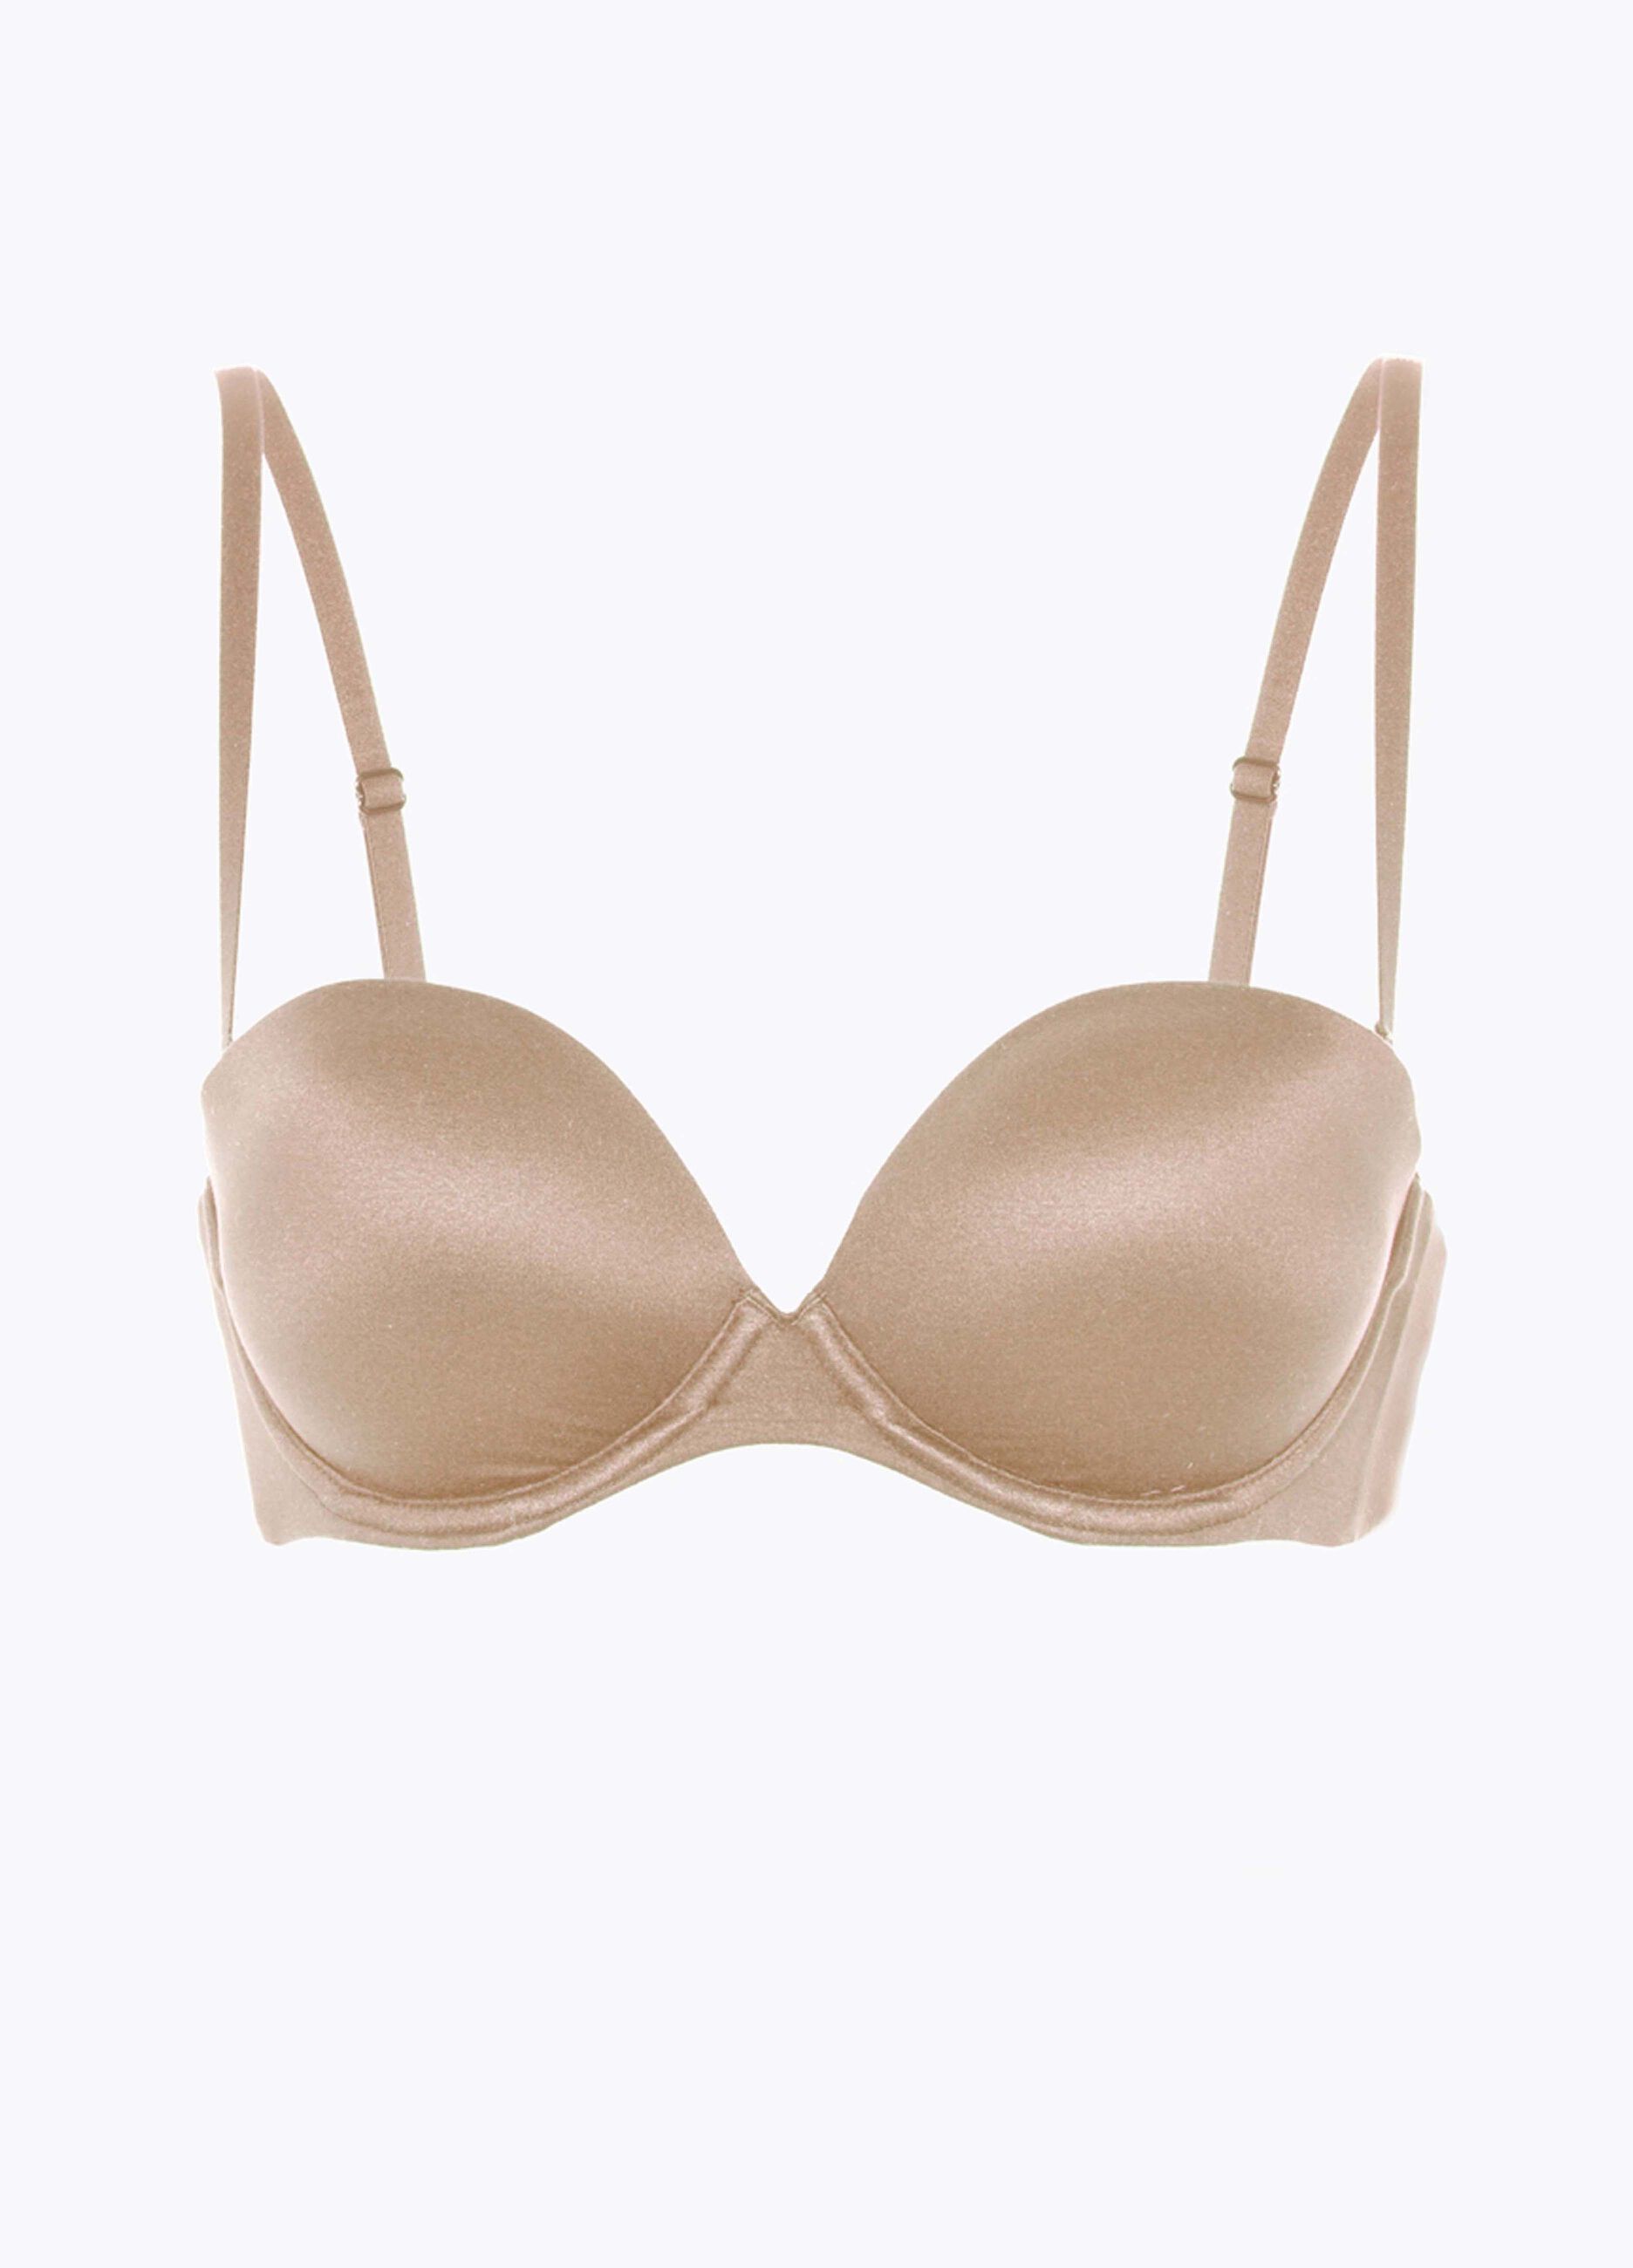 Body Bliss push-up bra with removable shoulder straps